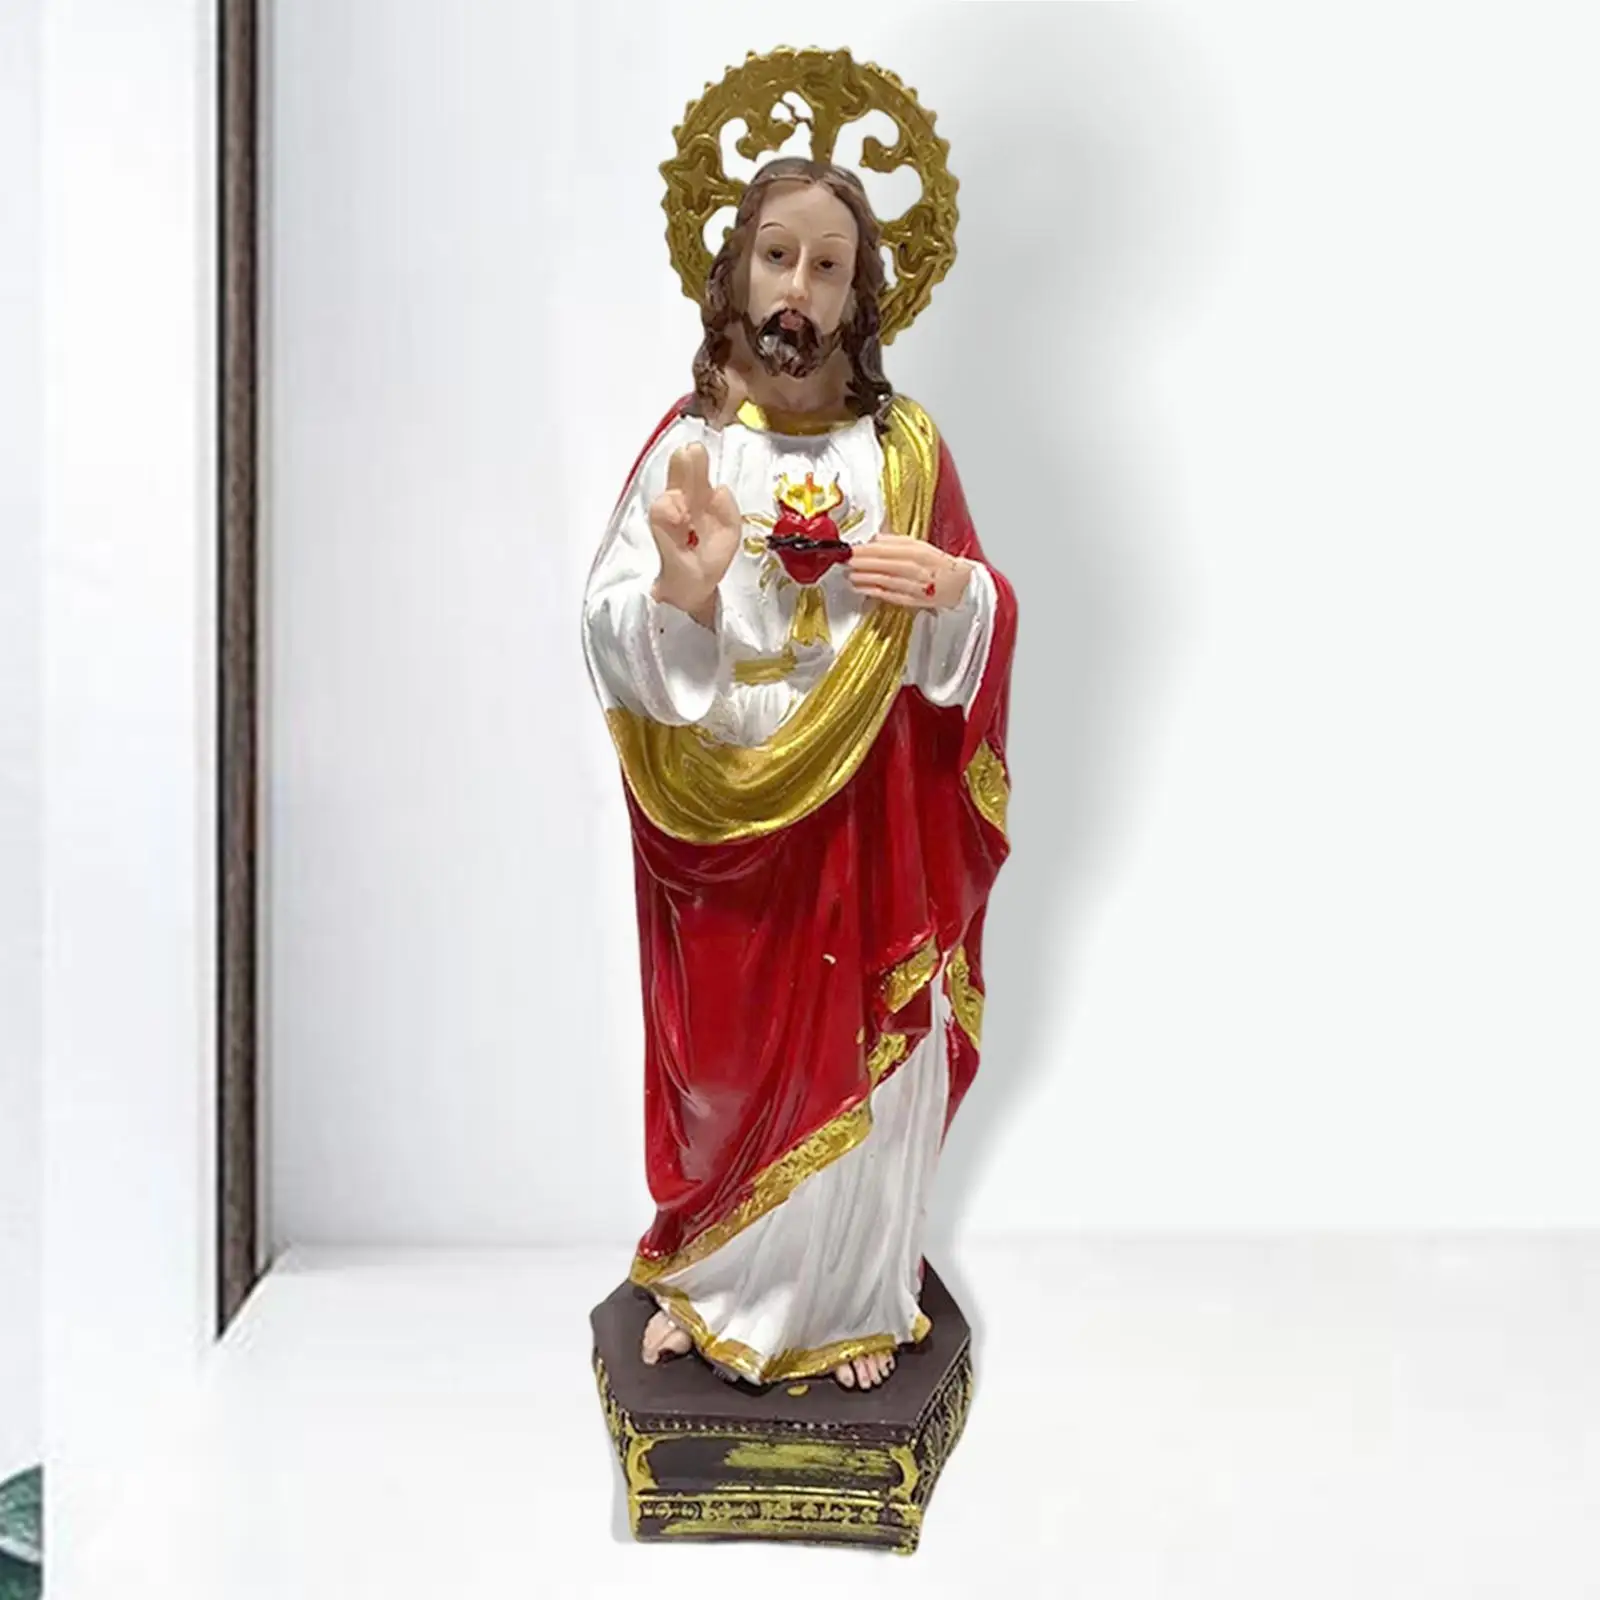  Statue, Sacred Heart Polyresin  Lord Catholic Gifts Collection Crafts Small Figurines for Garden Chapel Ornaments Church Shelf